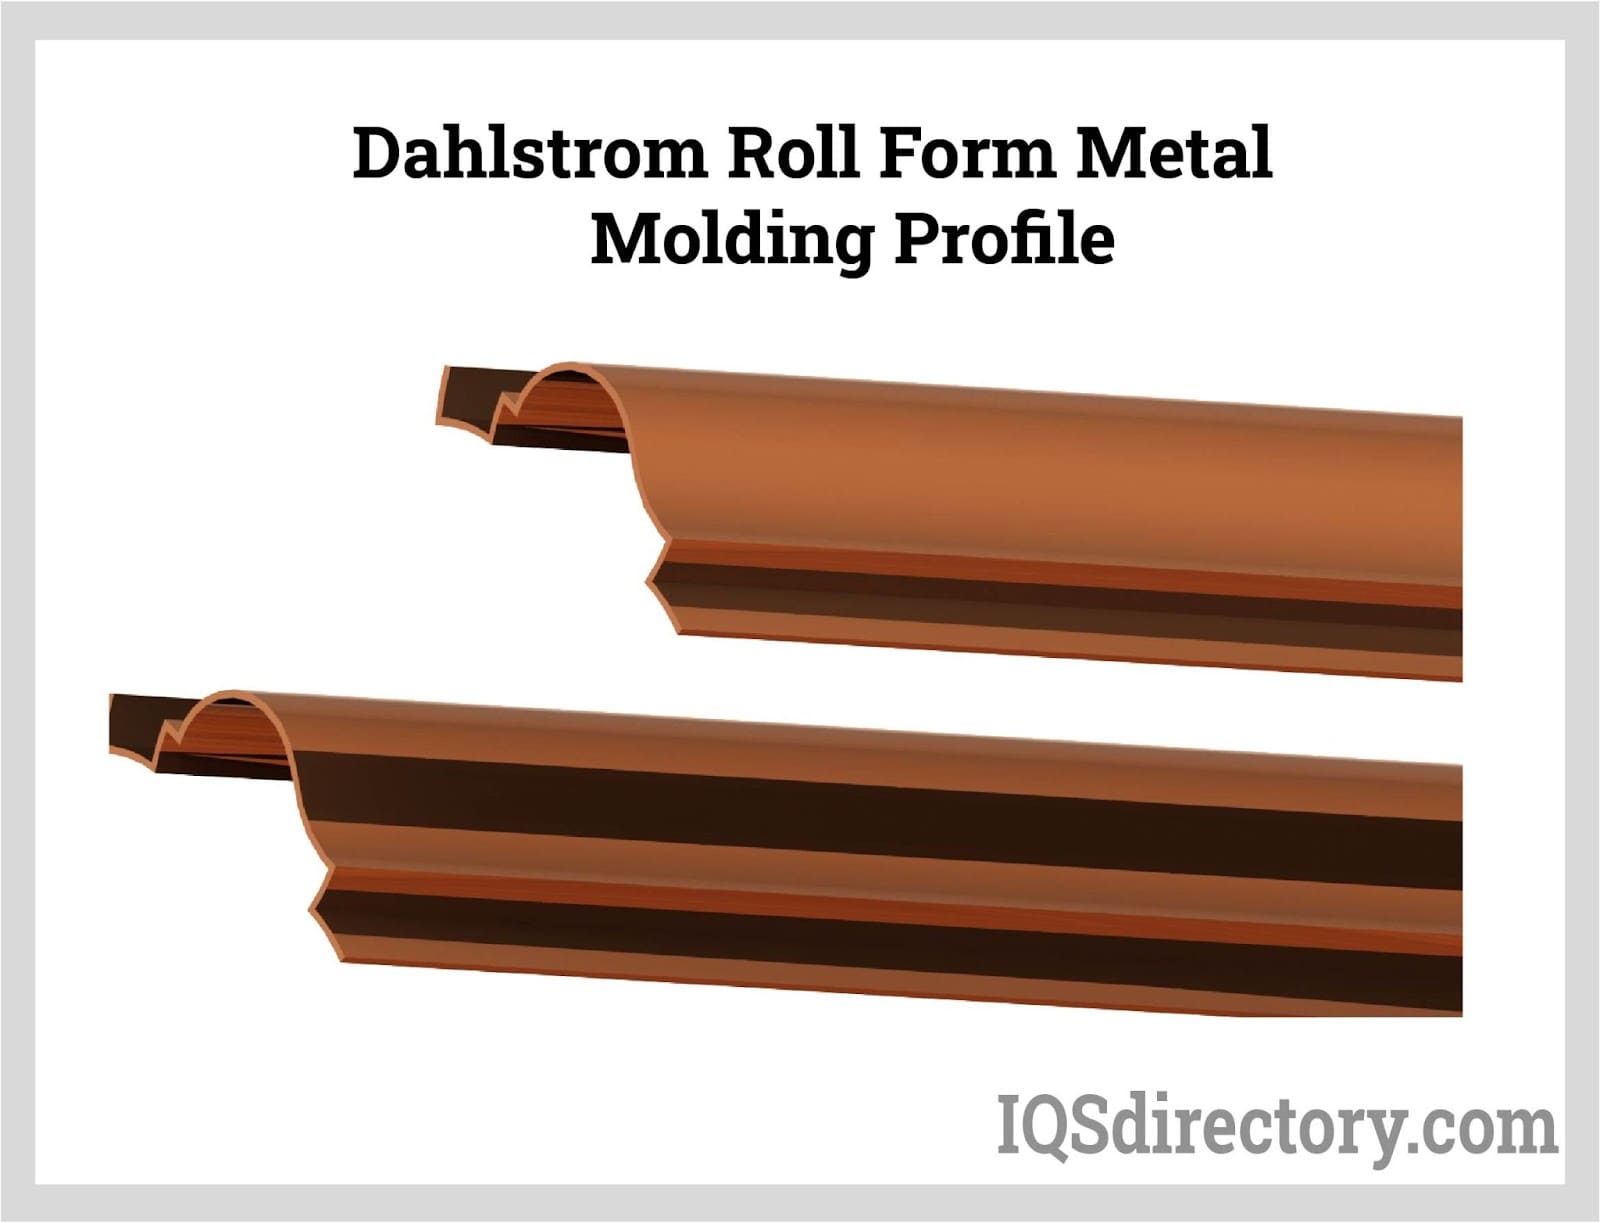  Dahlstrom Roll Form Metal Molding Profile